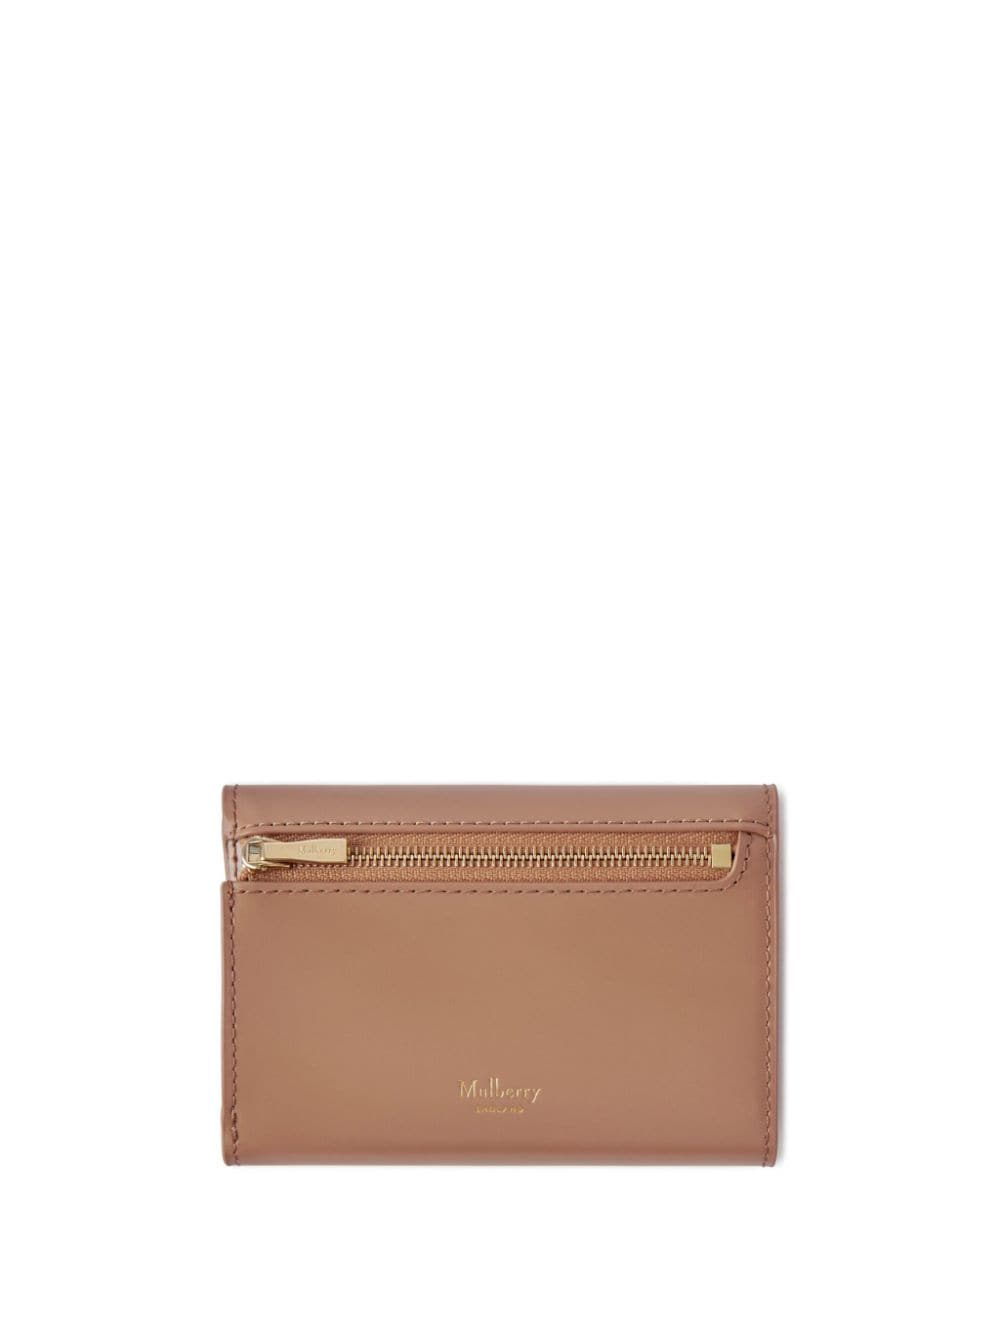 Mulberry Pimlico leather coin pouch - Beige